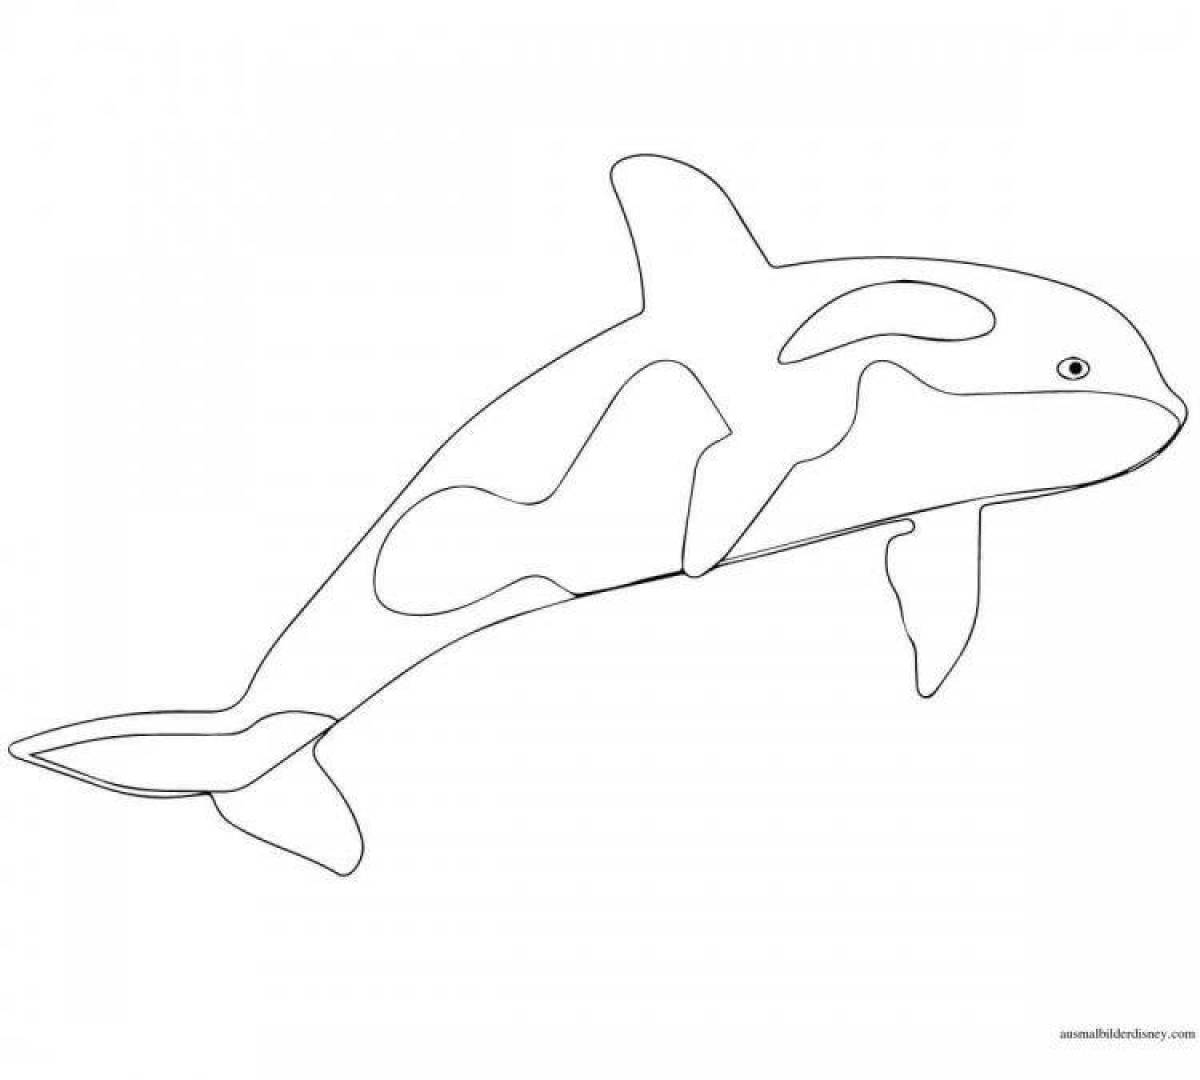 Great orca coloring book for kids